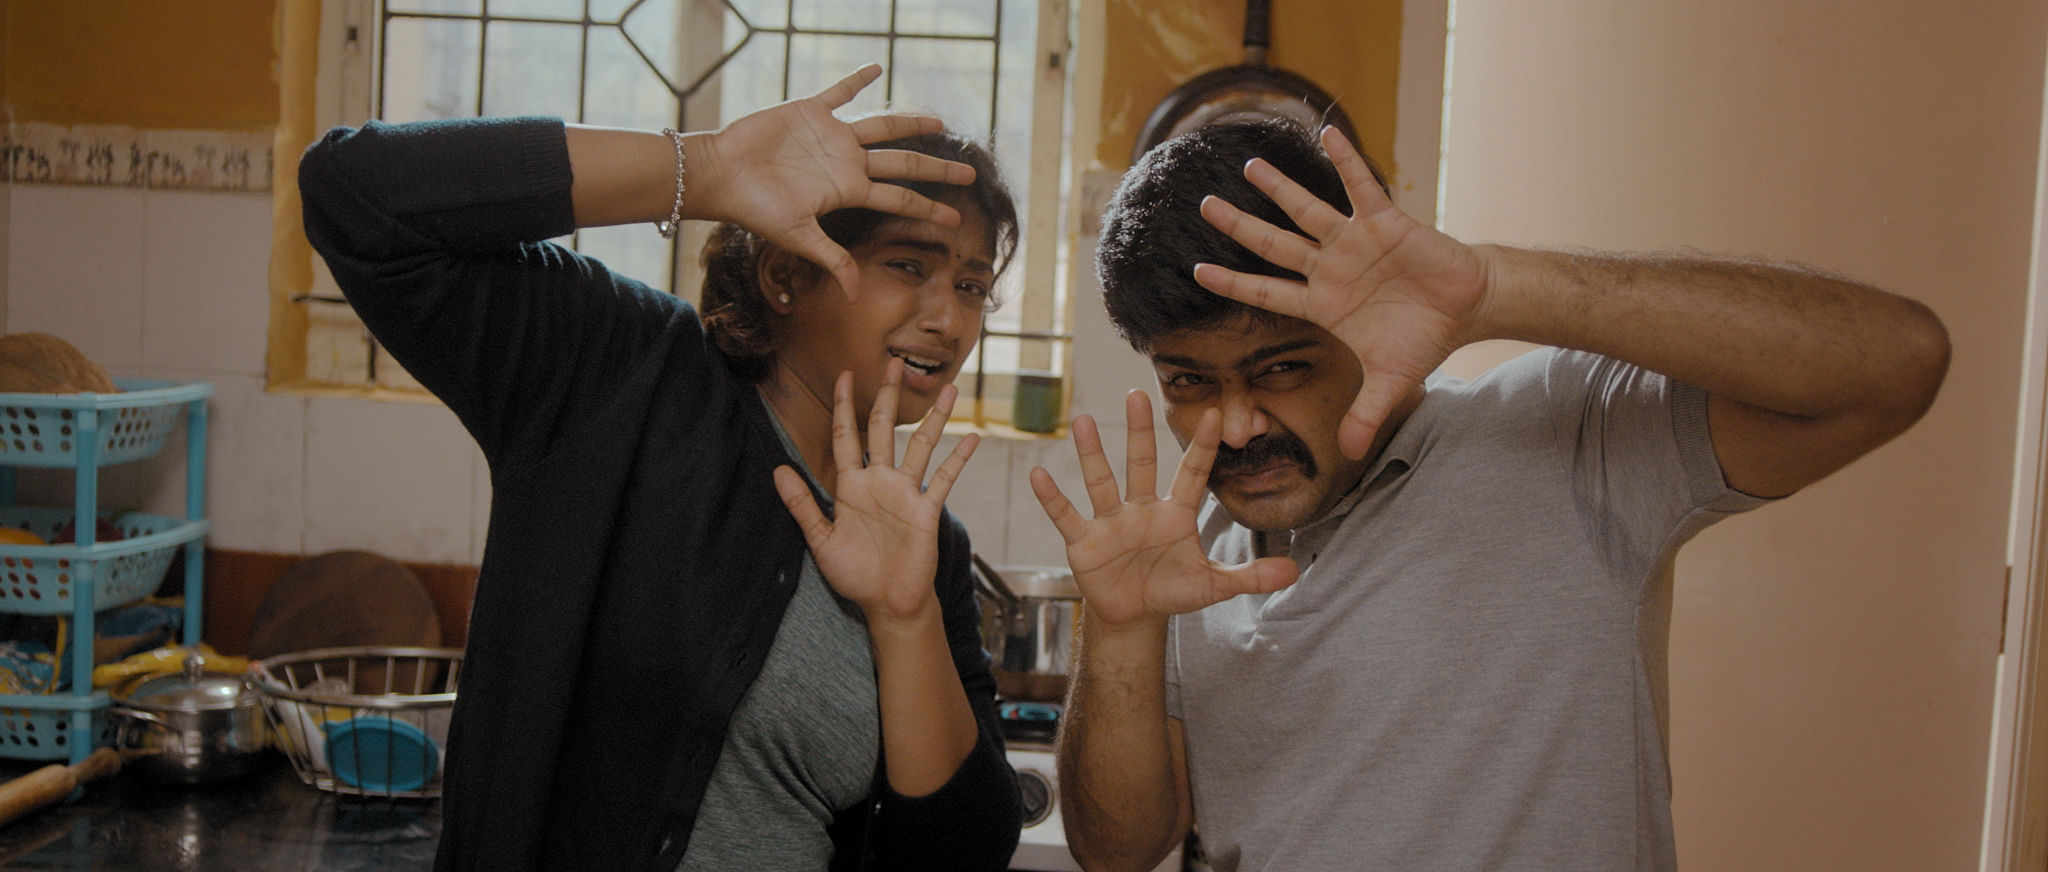 Bhoomi Shetty and Nagabhushana play a couple in a troubled marriage in 'Ikkat'.